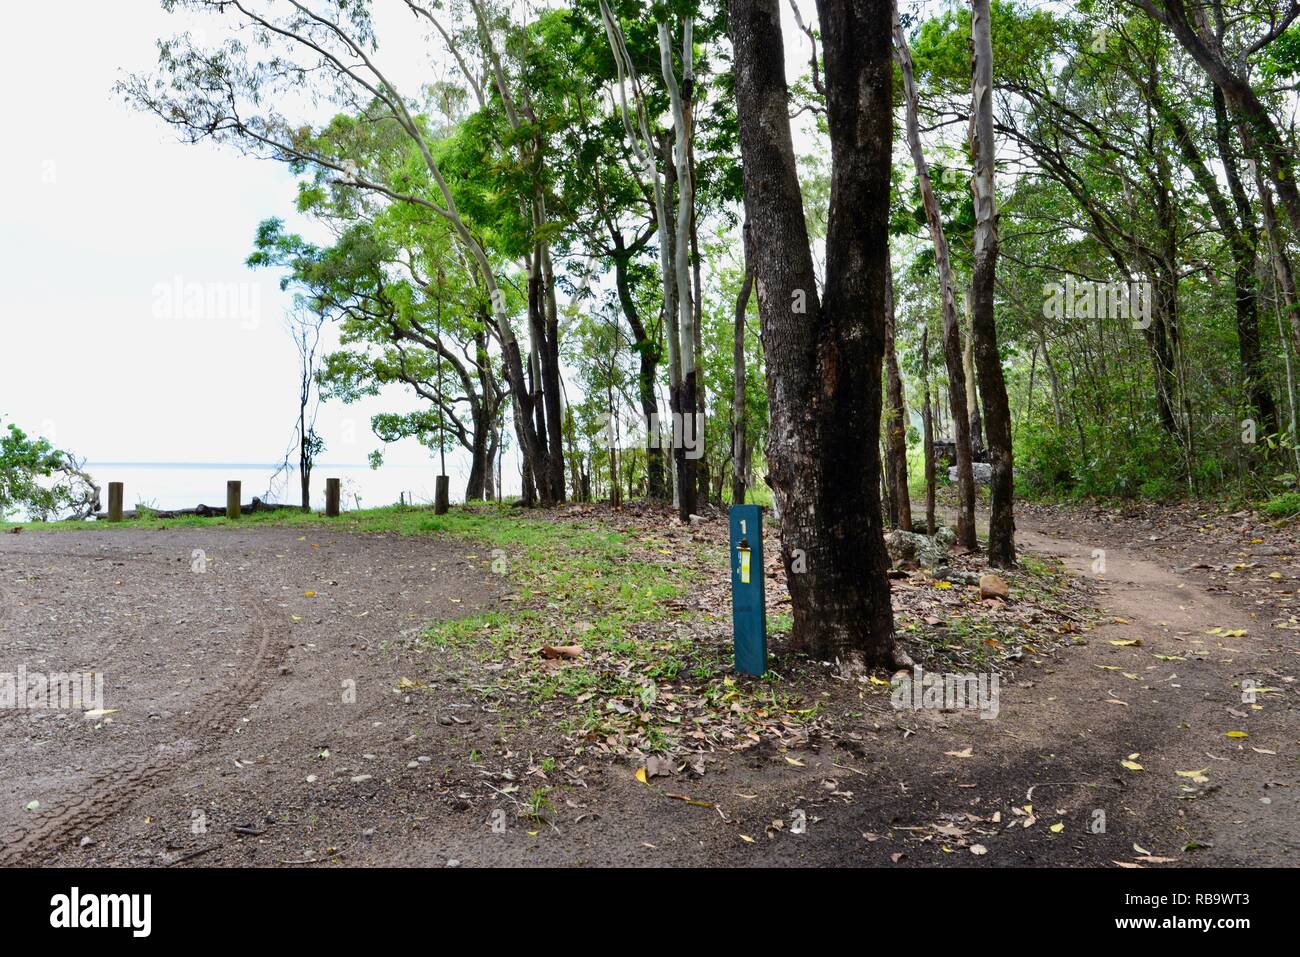 Scenes from the Smalleys Beach Camp Ground, Cape Hillsborough National Park, Qld, Australia Stock Photo